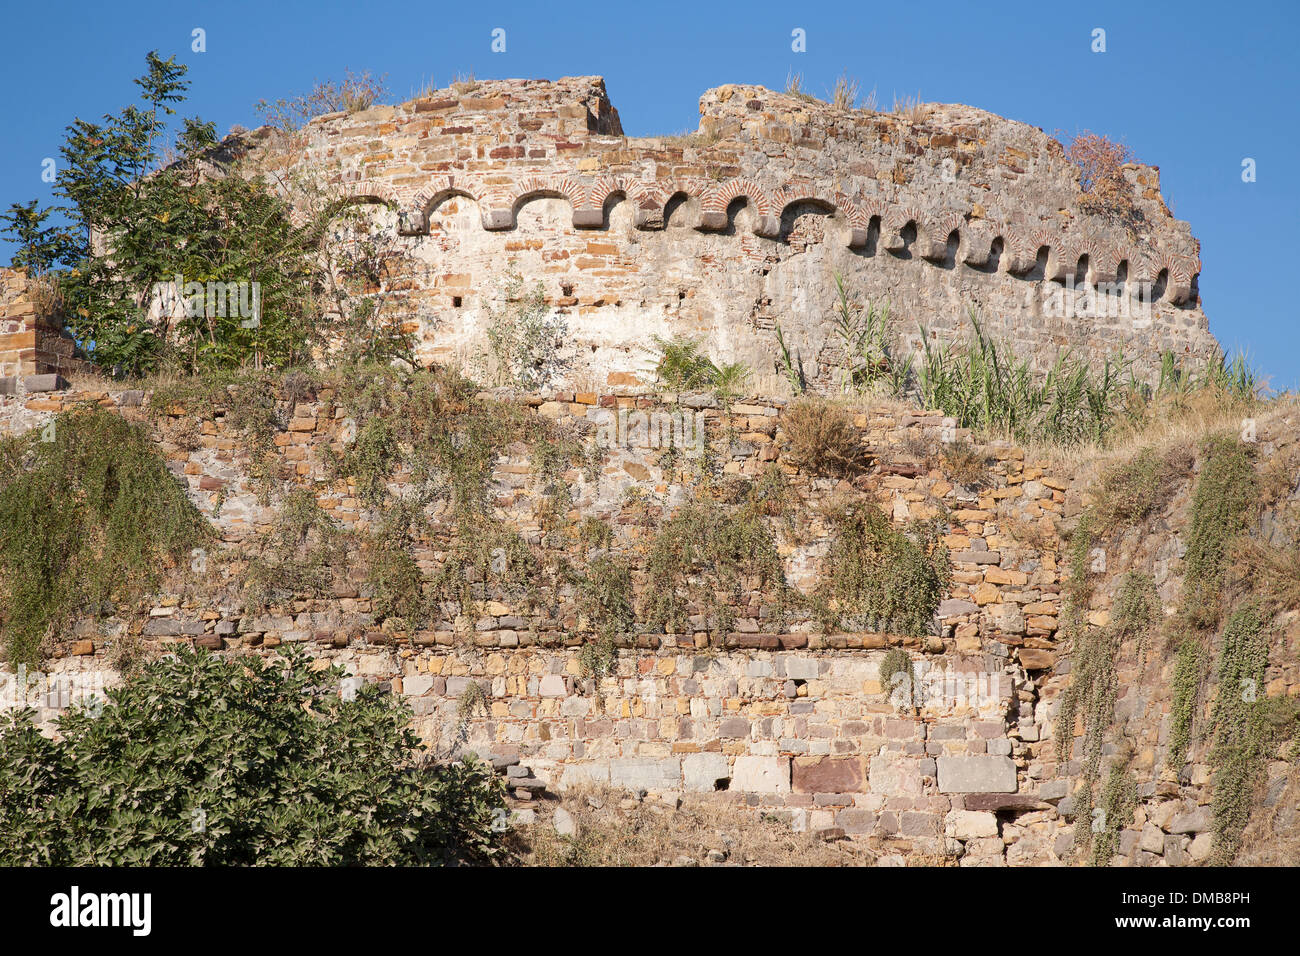 genoese castle, chios city, island of chios, north east aegean sea, greece, europe Stock Photo